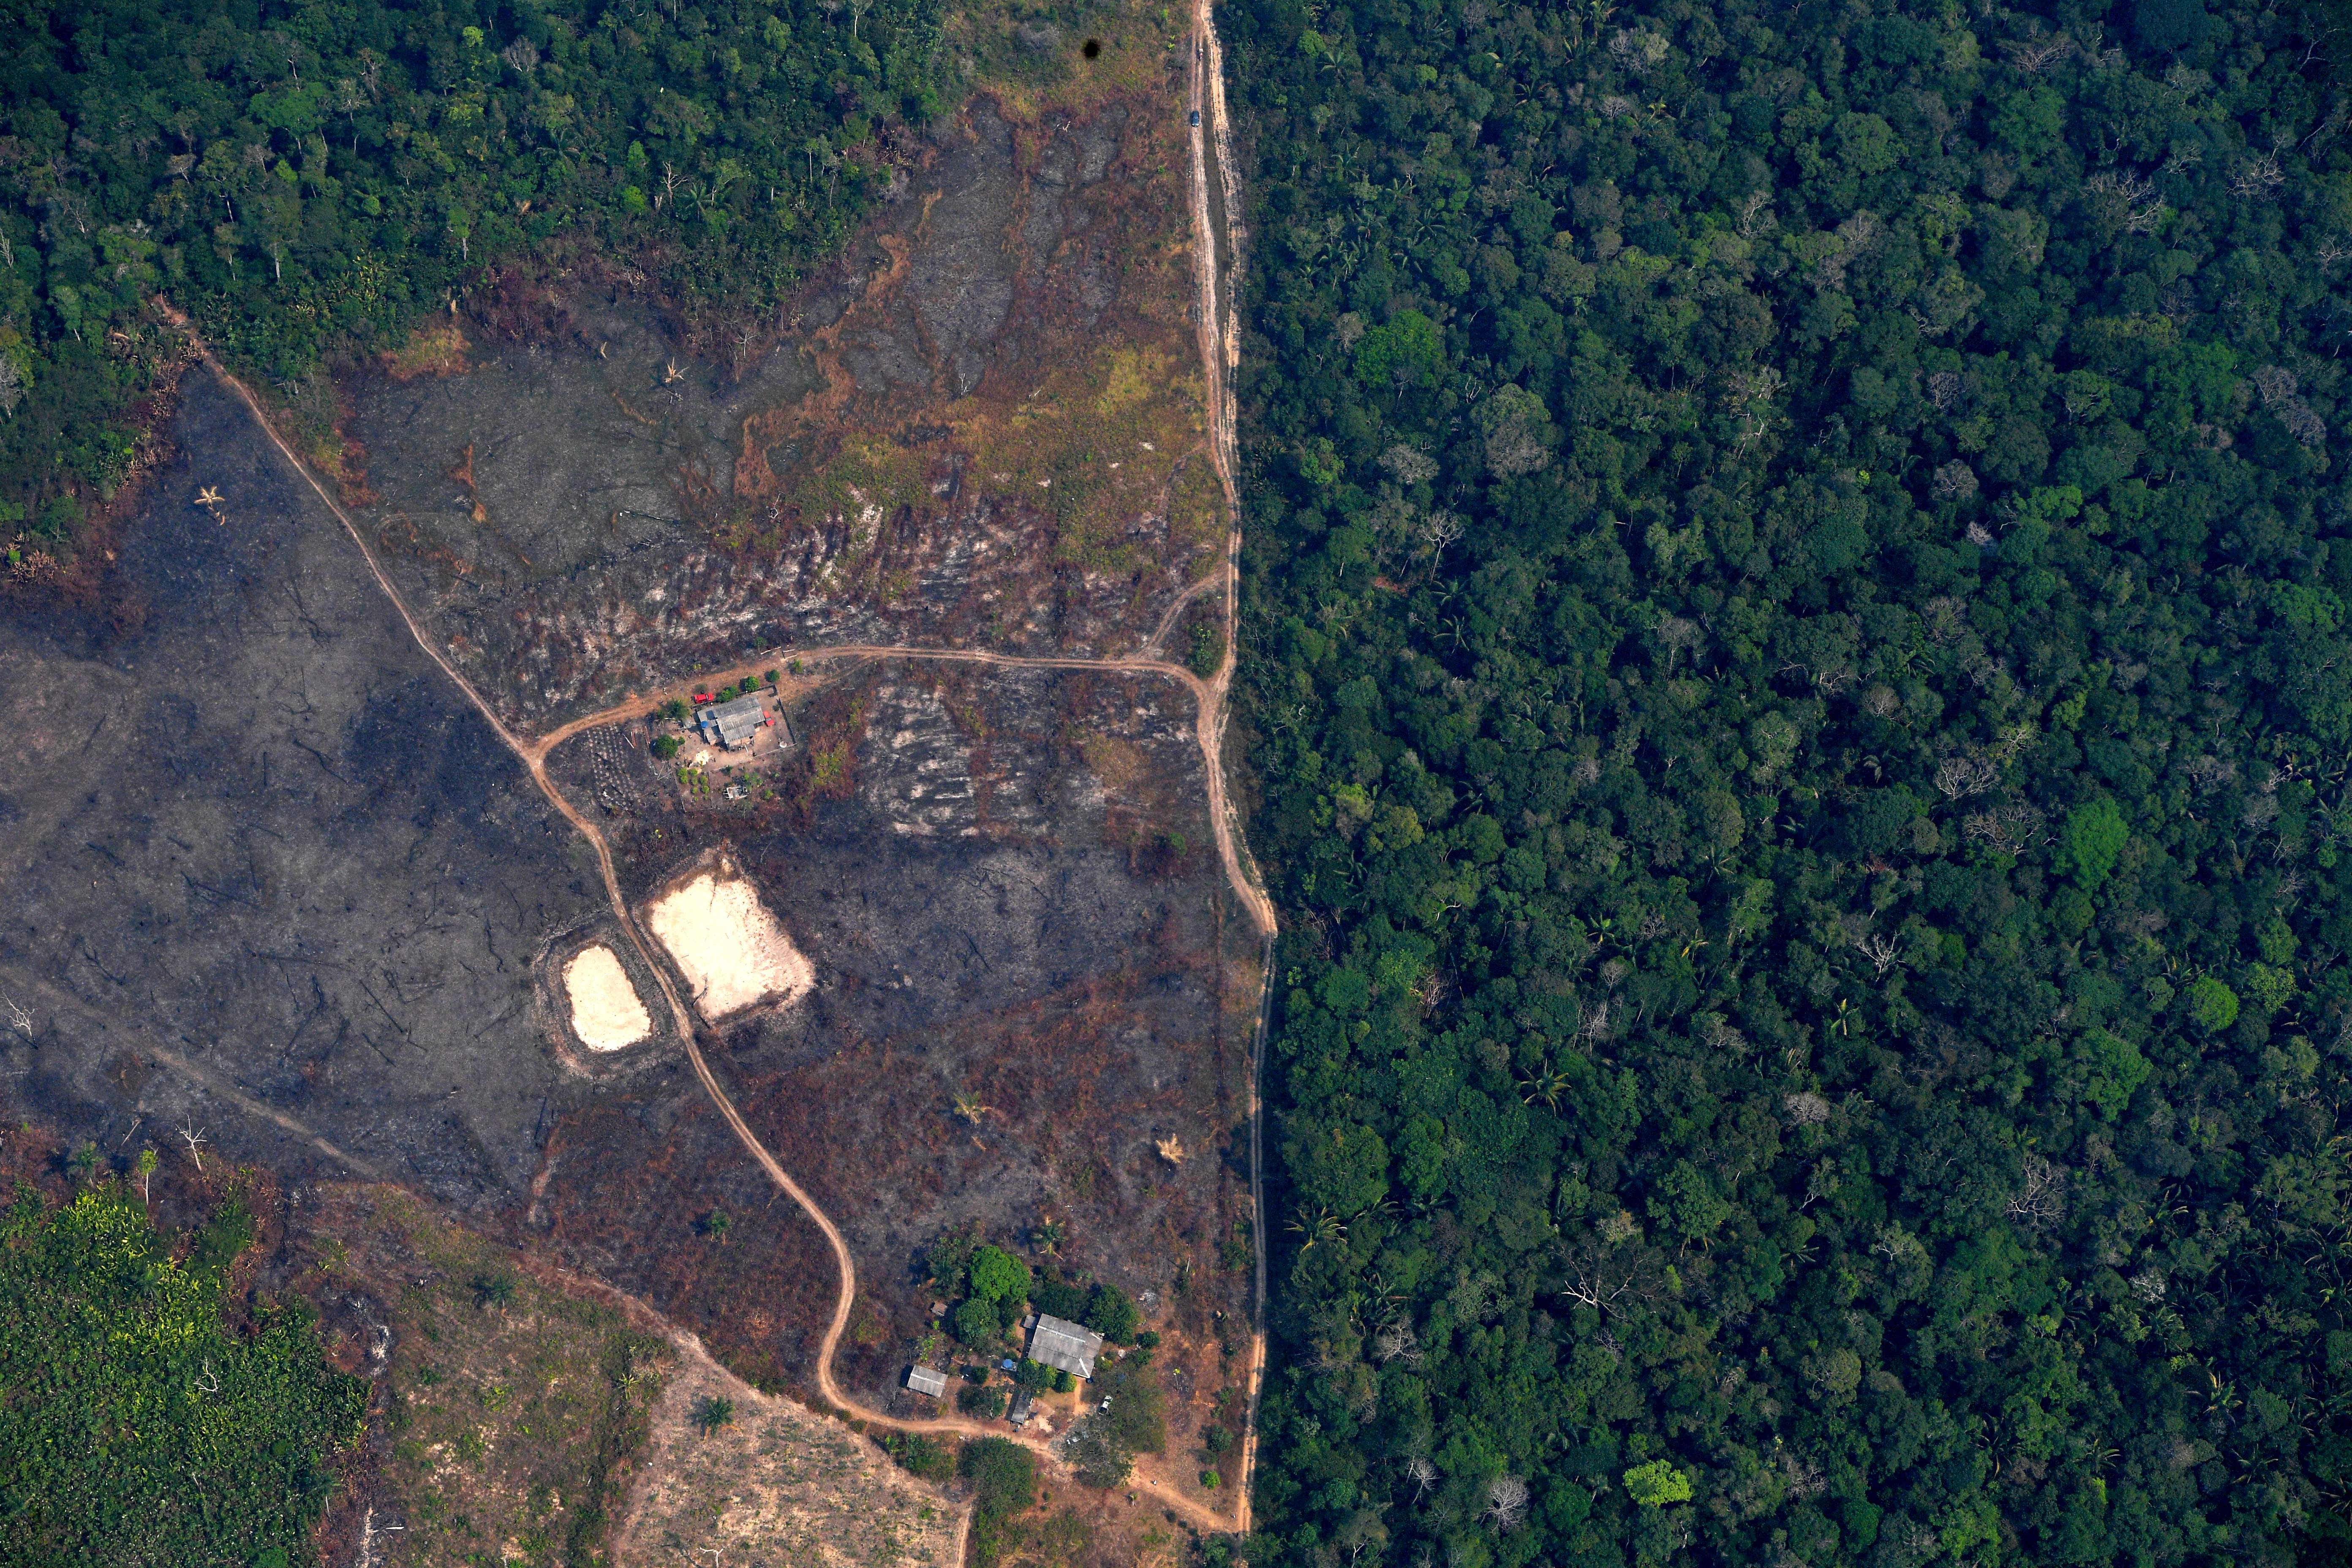 The use of soy and palm oils as biofuels are causing deforestation